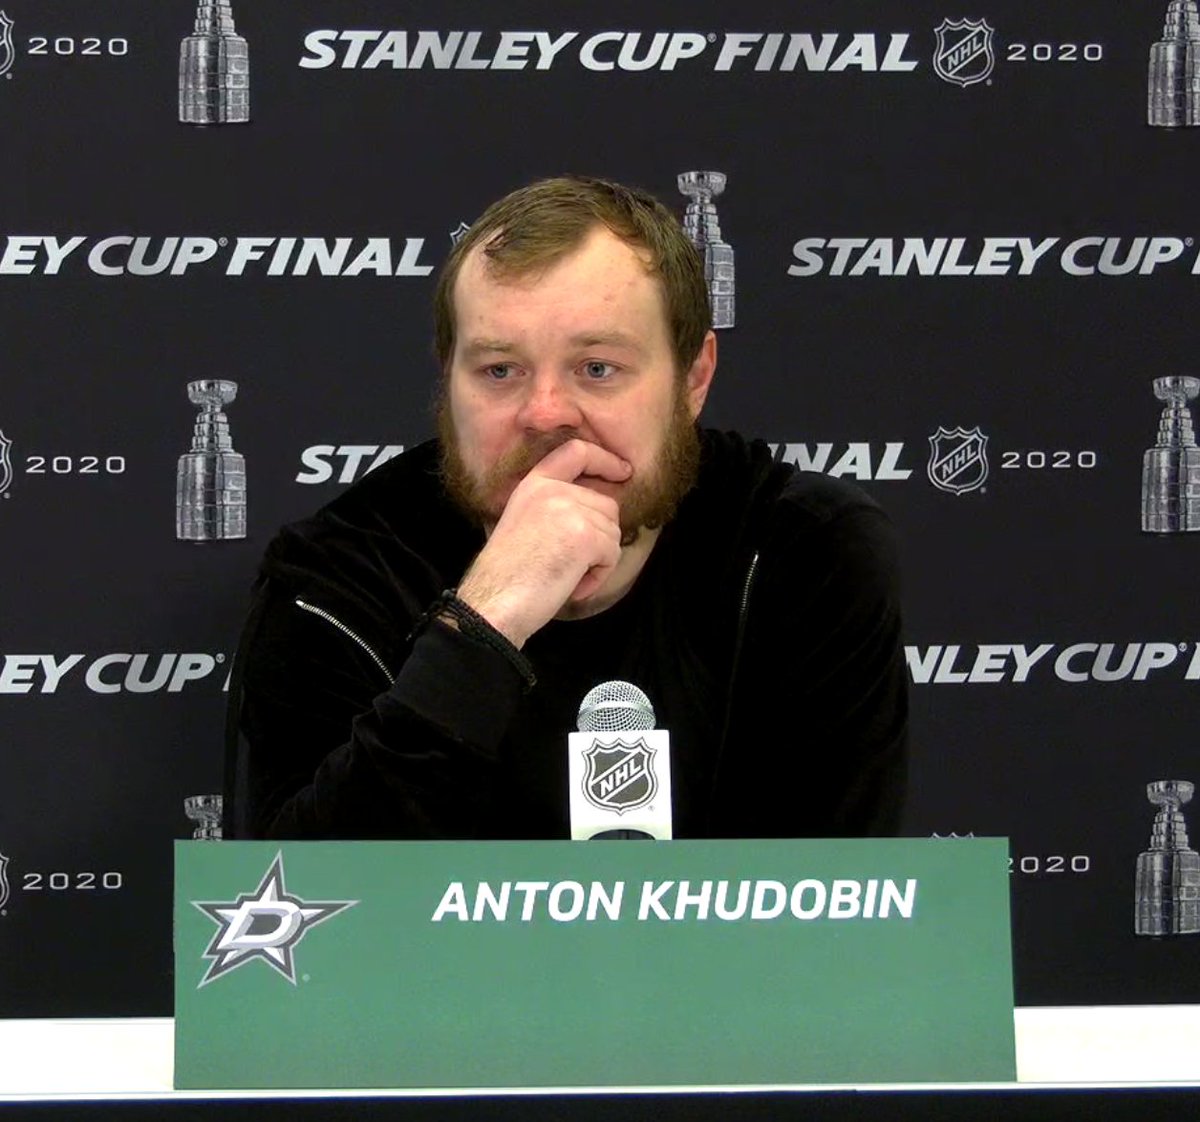 'There's no feelings right now. Just empty,' Anton Khudobin said about the loss.